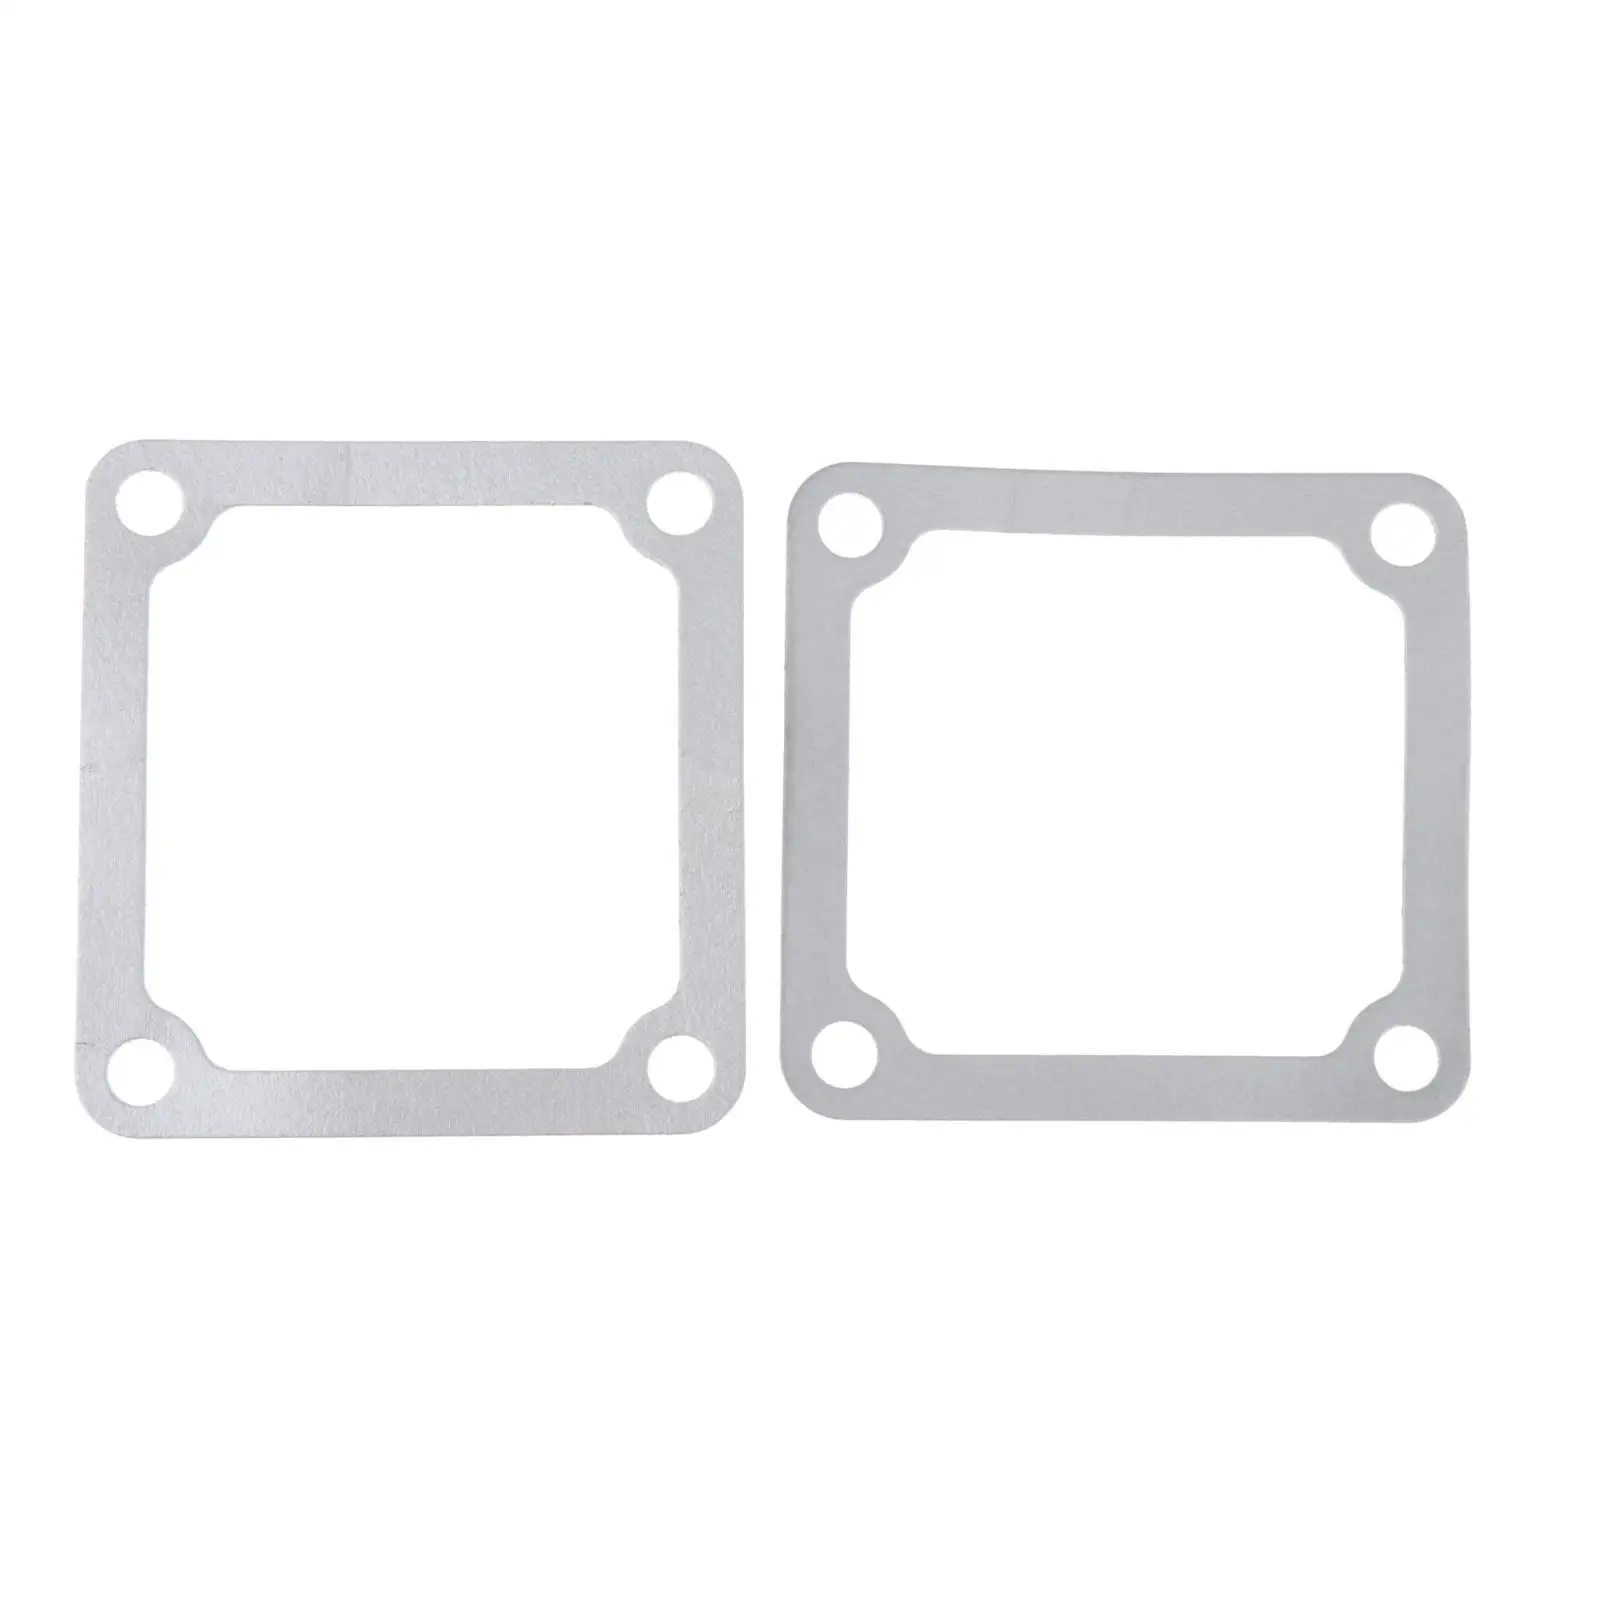 2Pcs Intake Heater Grid Gaskets Vehicle 5.9L Strong Sealing Auto Parts